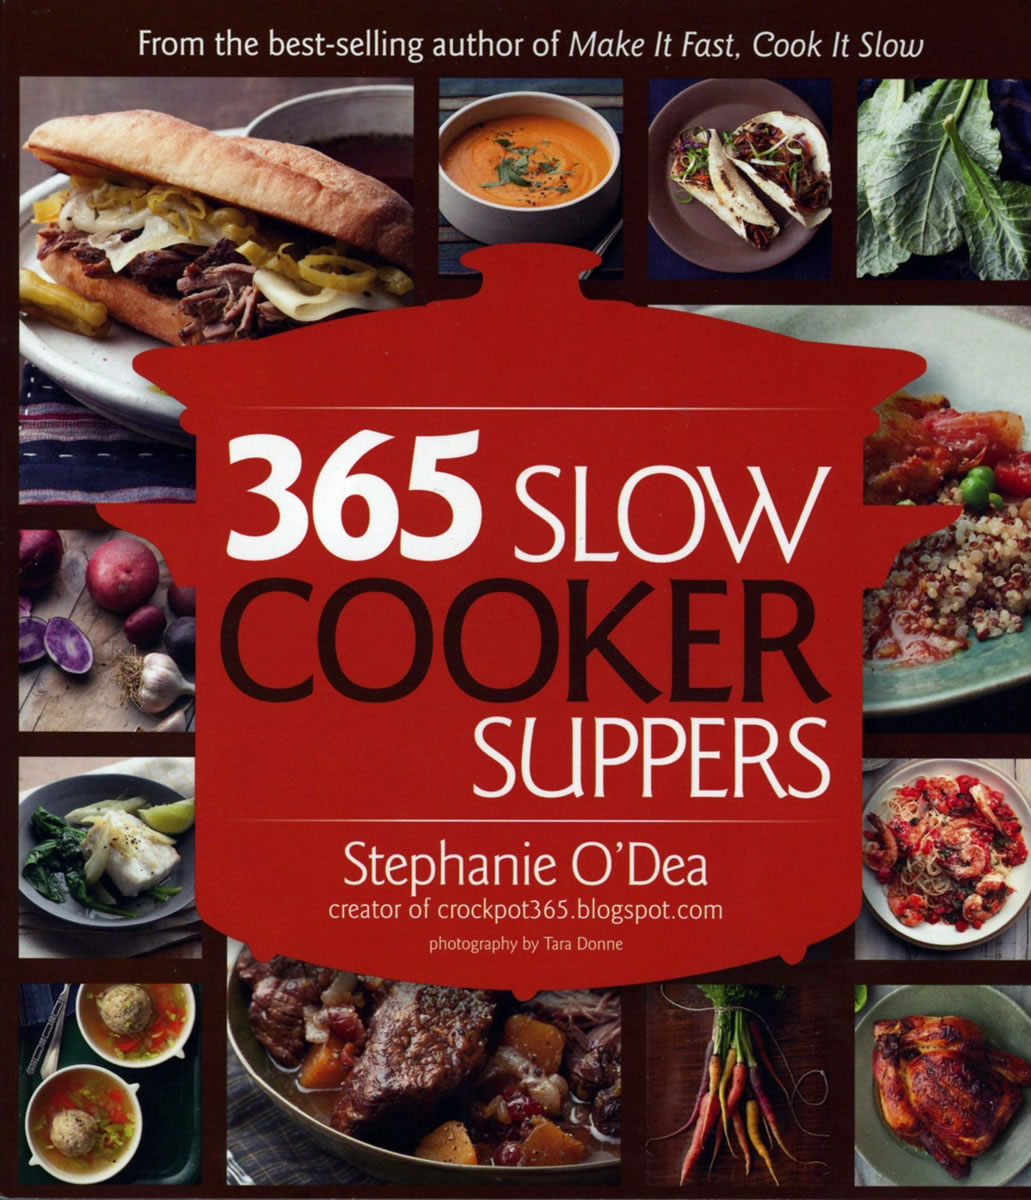 &quot;365 Slow Cooker Suppers&quot; ($24.99, softcover, Houghton Mifflin Harcourt) by Stephanie O'Dea offers recipes for a year's worth of slow cooker suppers, including one for Sloppy Joes that gets a little sweetness from the addition of a cup of Dr.